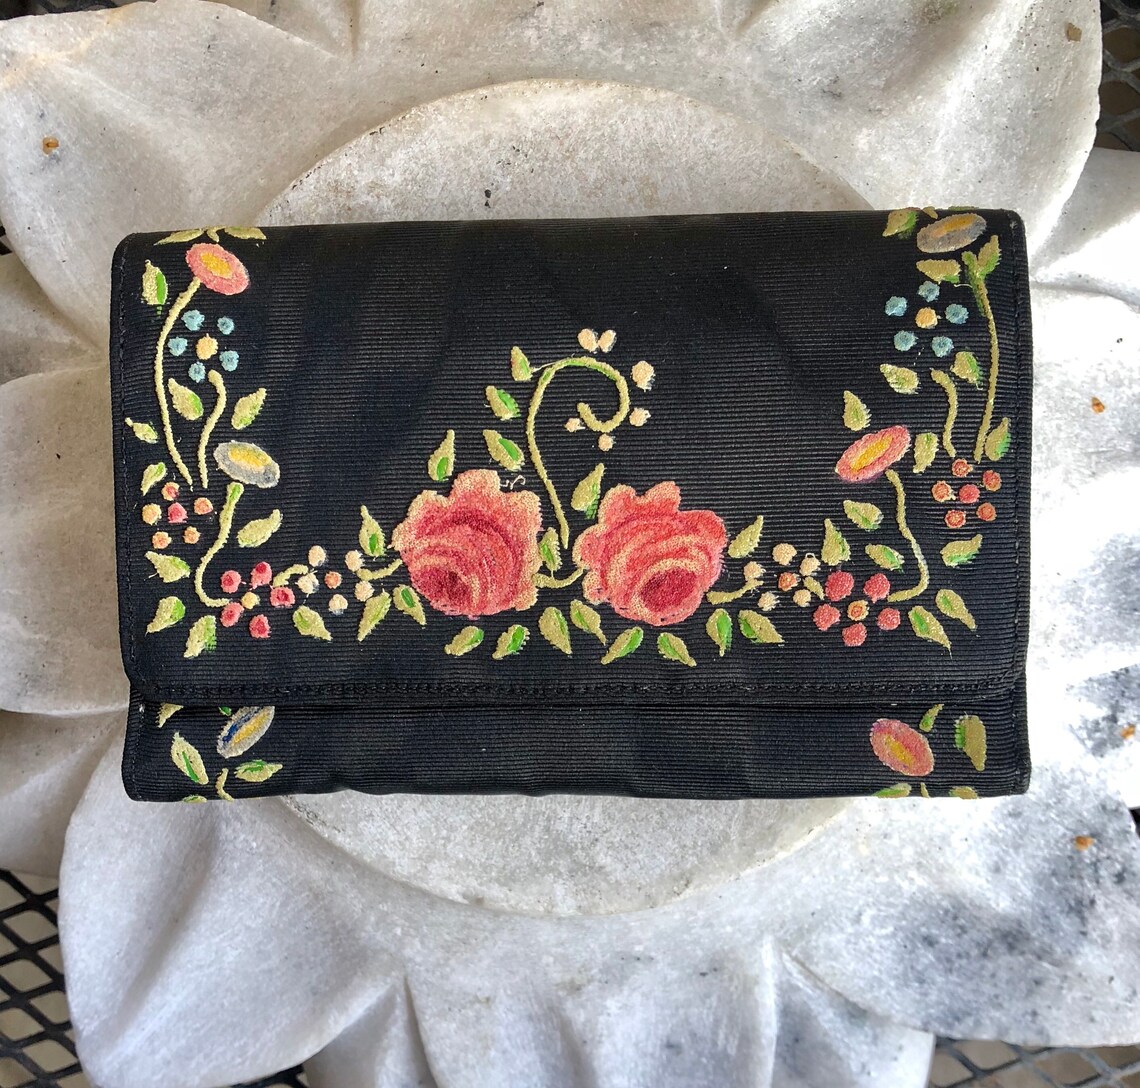 Most Beautiful 1930s Hand Wrist Bag Black Silk Embroidered | Etsy